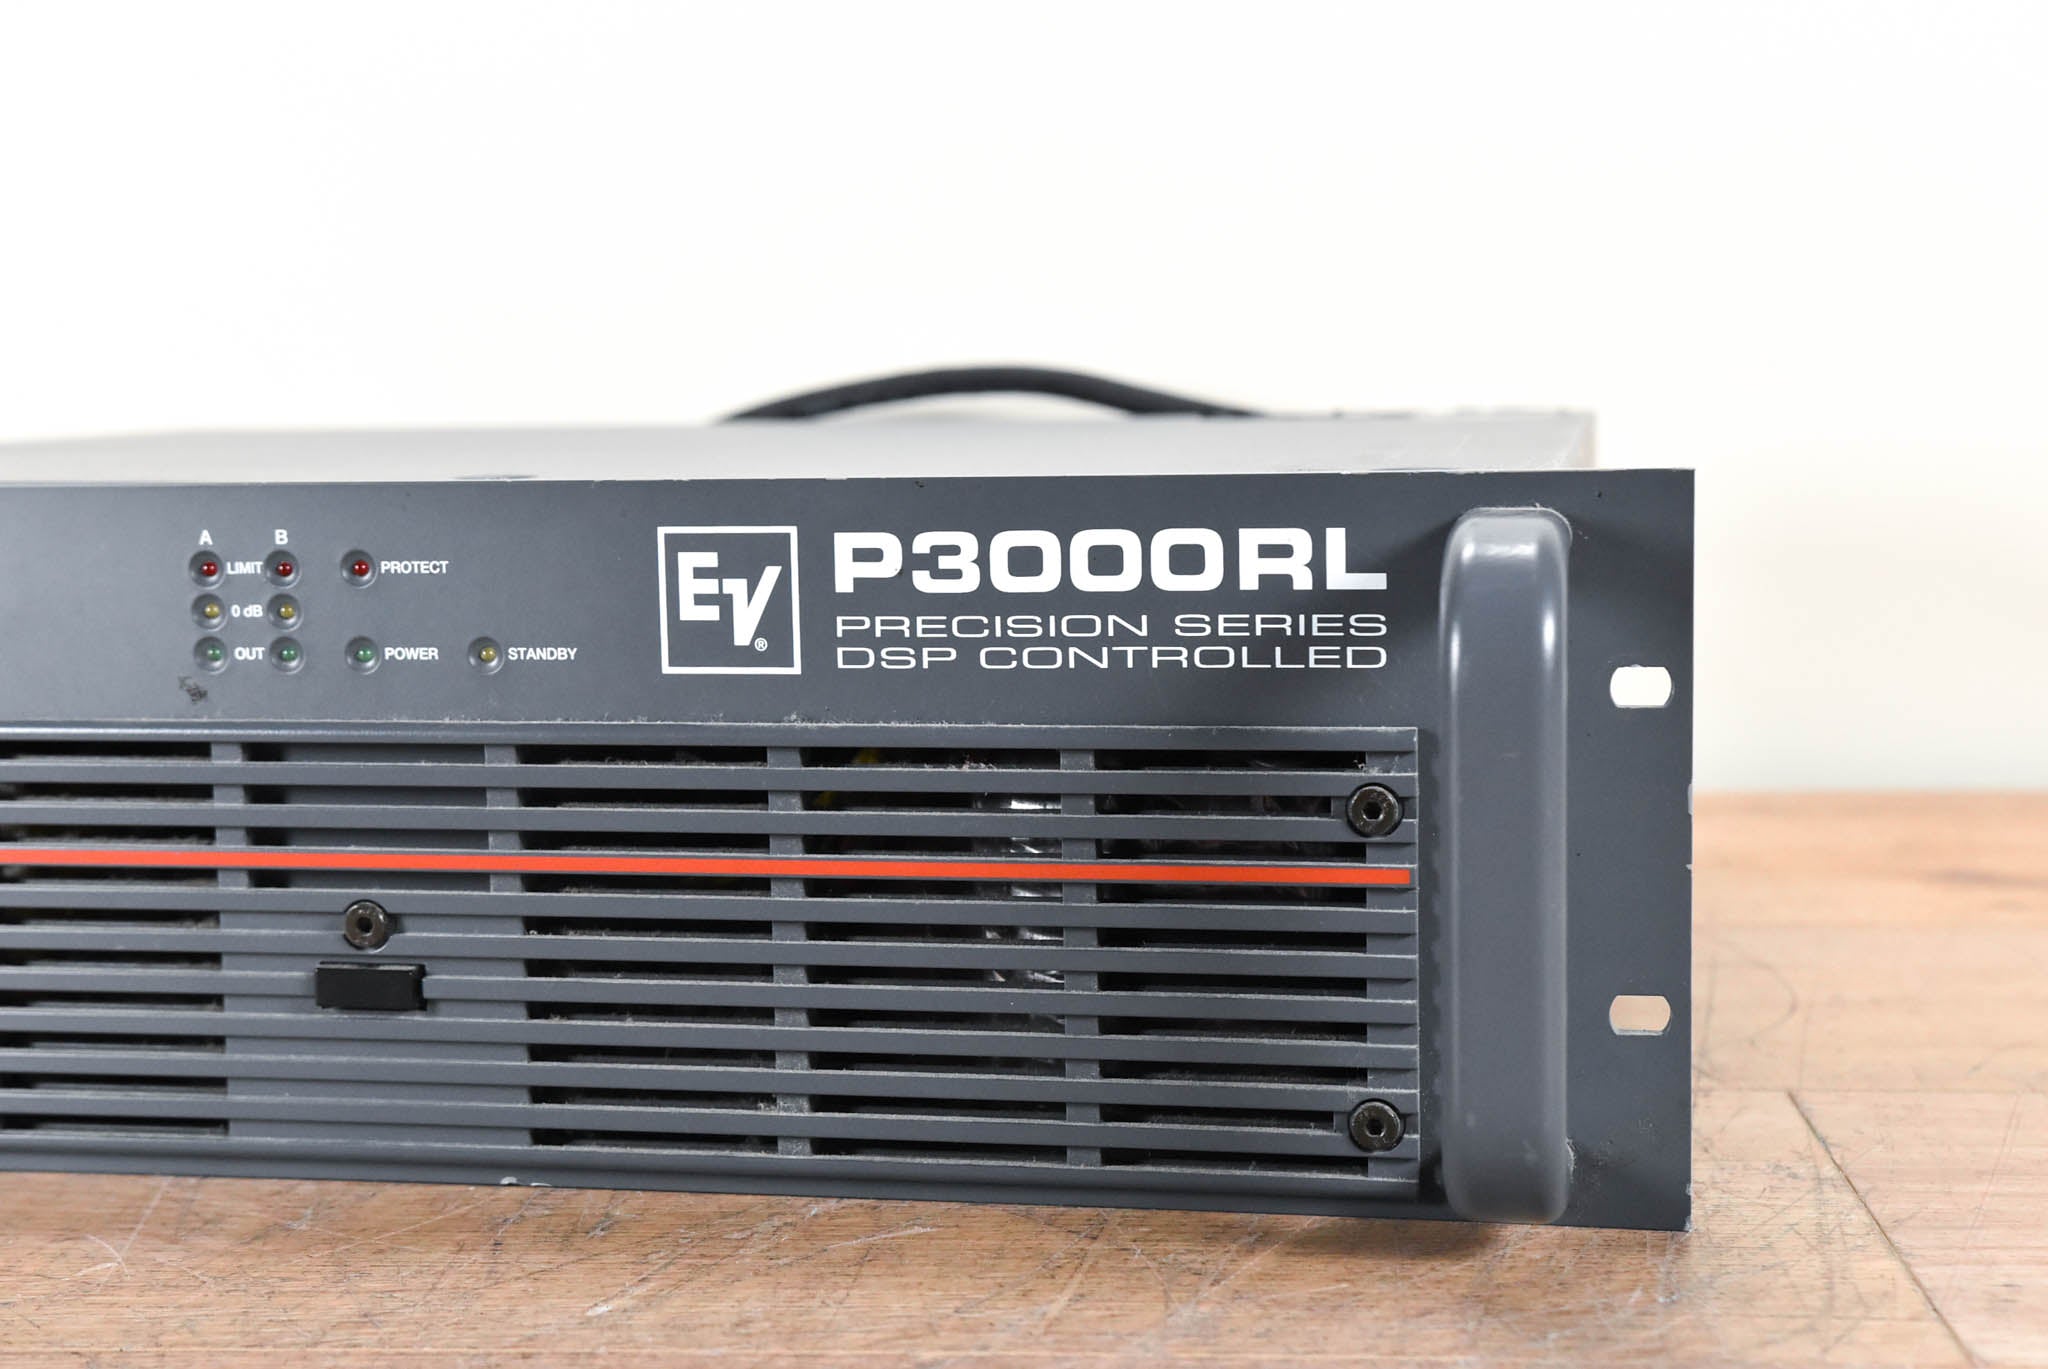 Electro-Voice (EV) P3000RL DSP-Controlled 2-Channel Power Amplifier